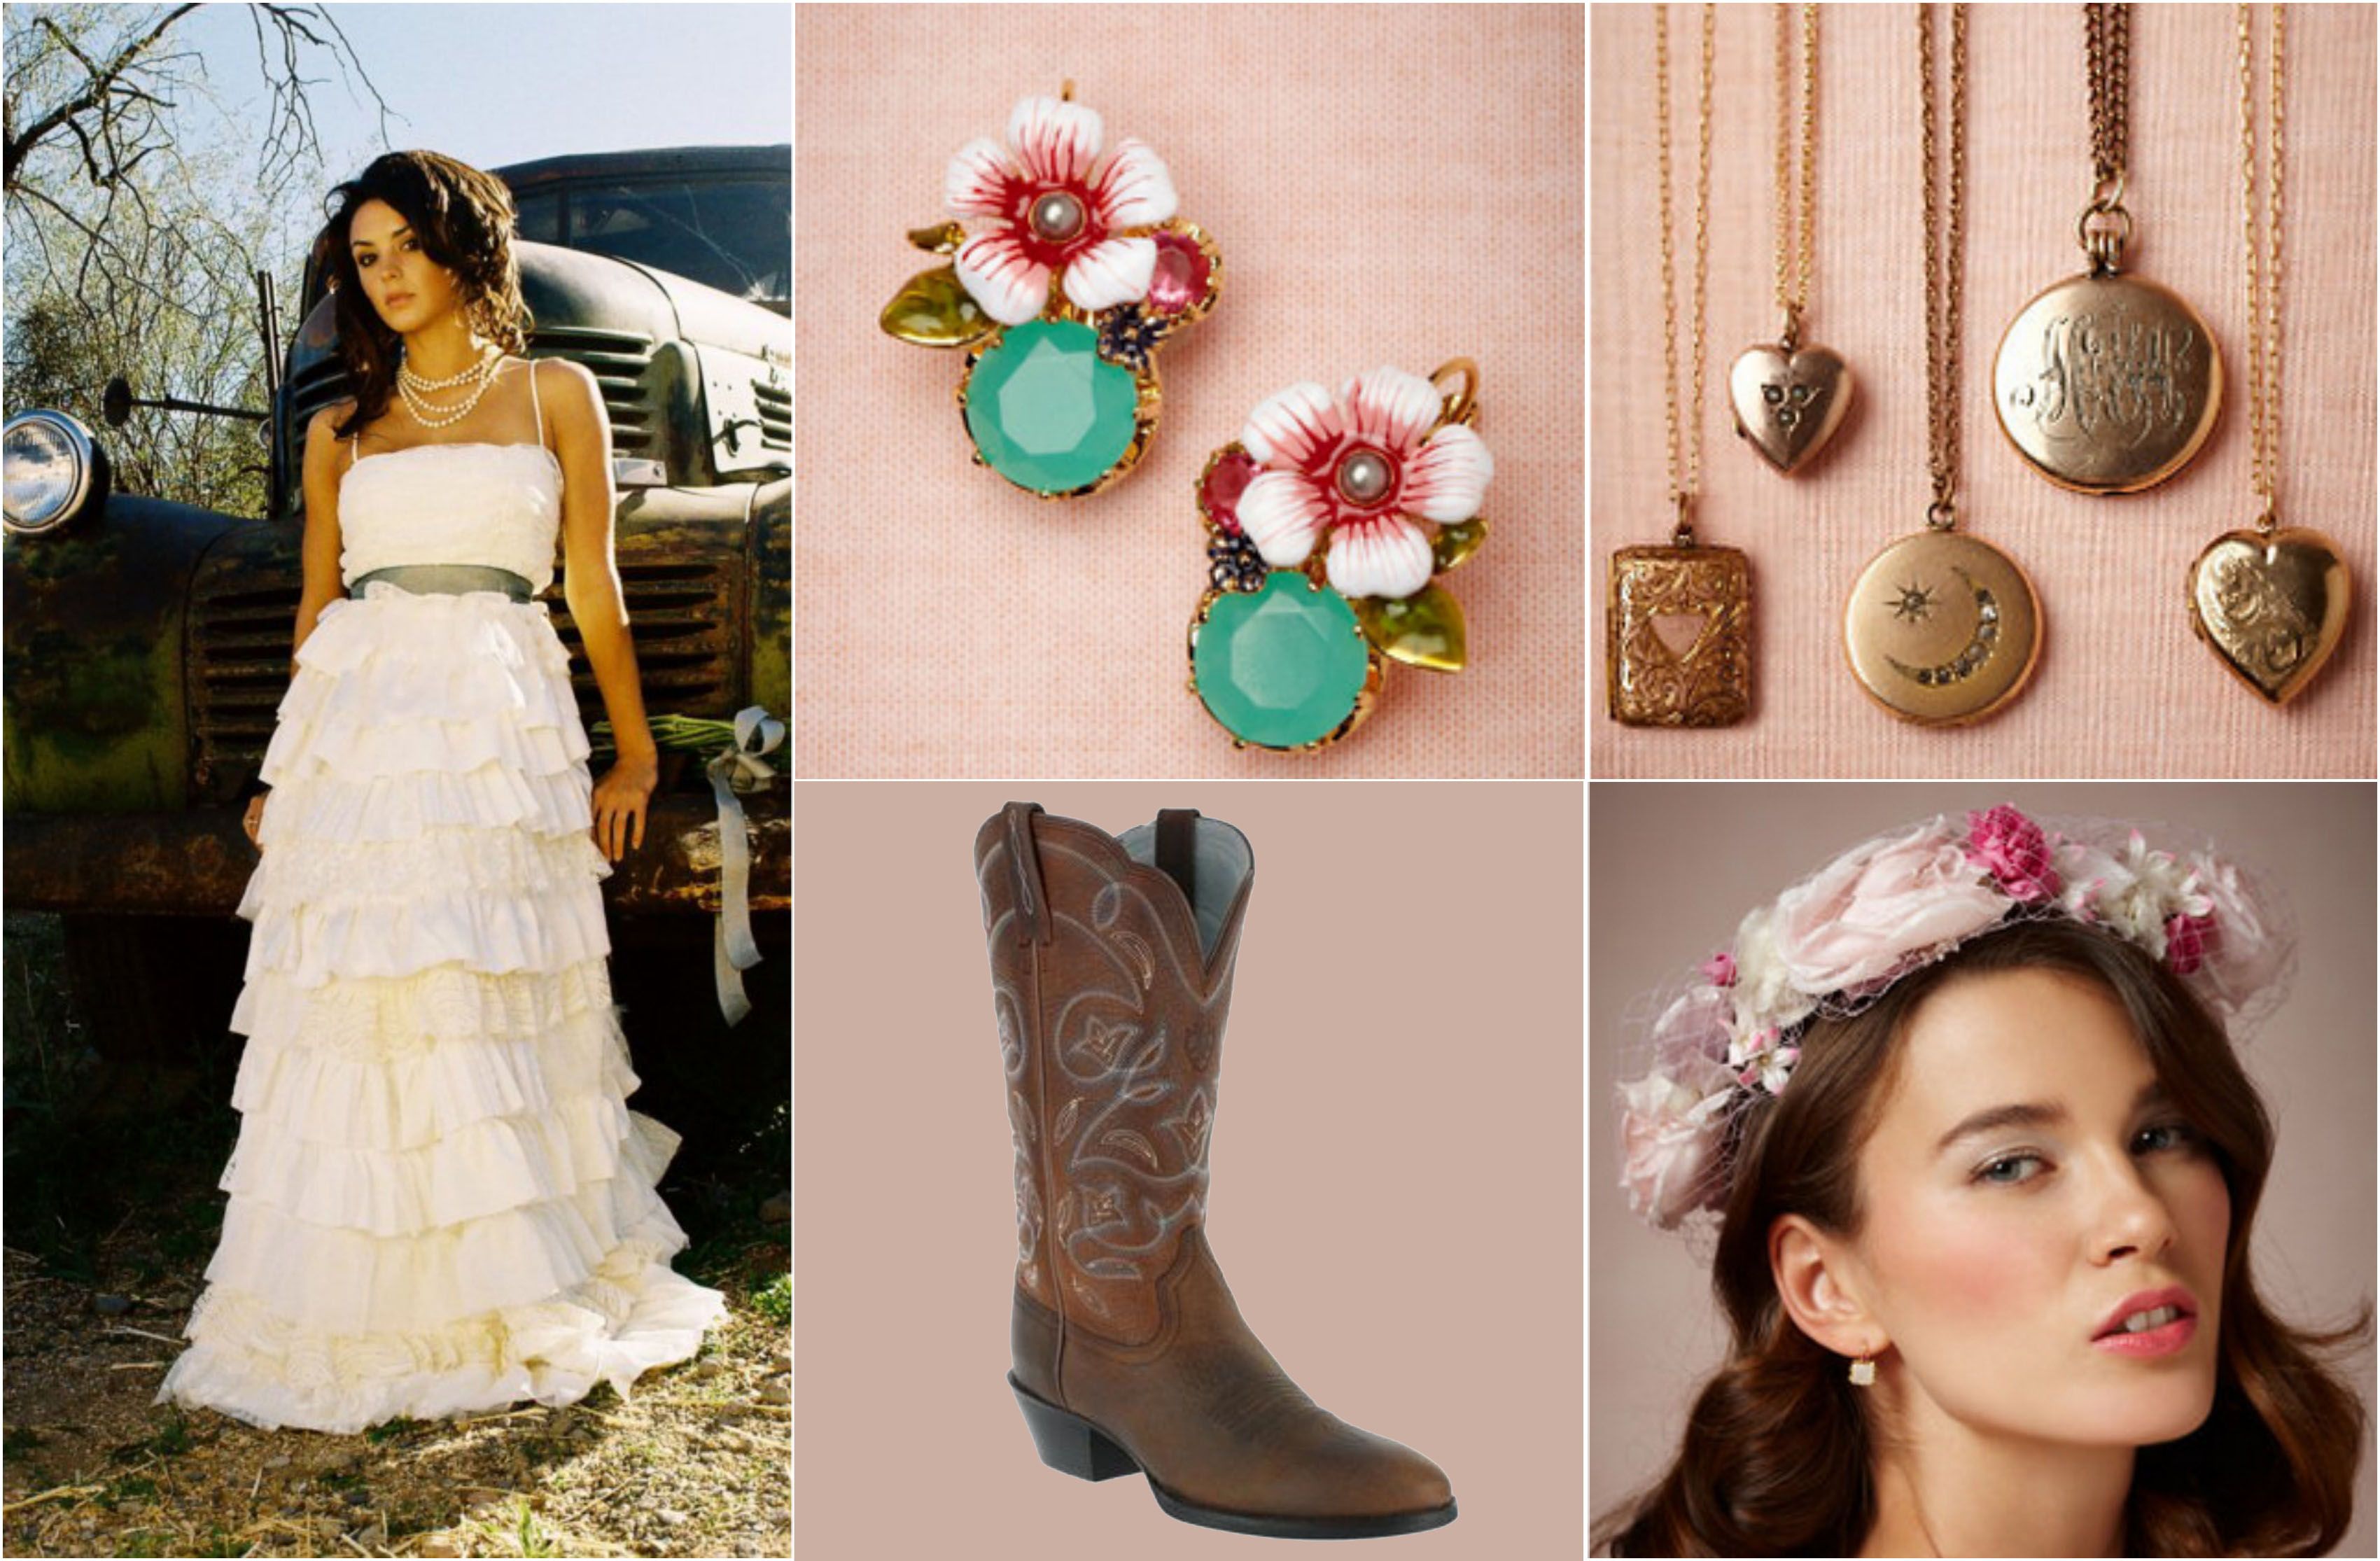 wedding dress and cowboy boots